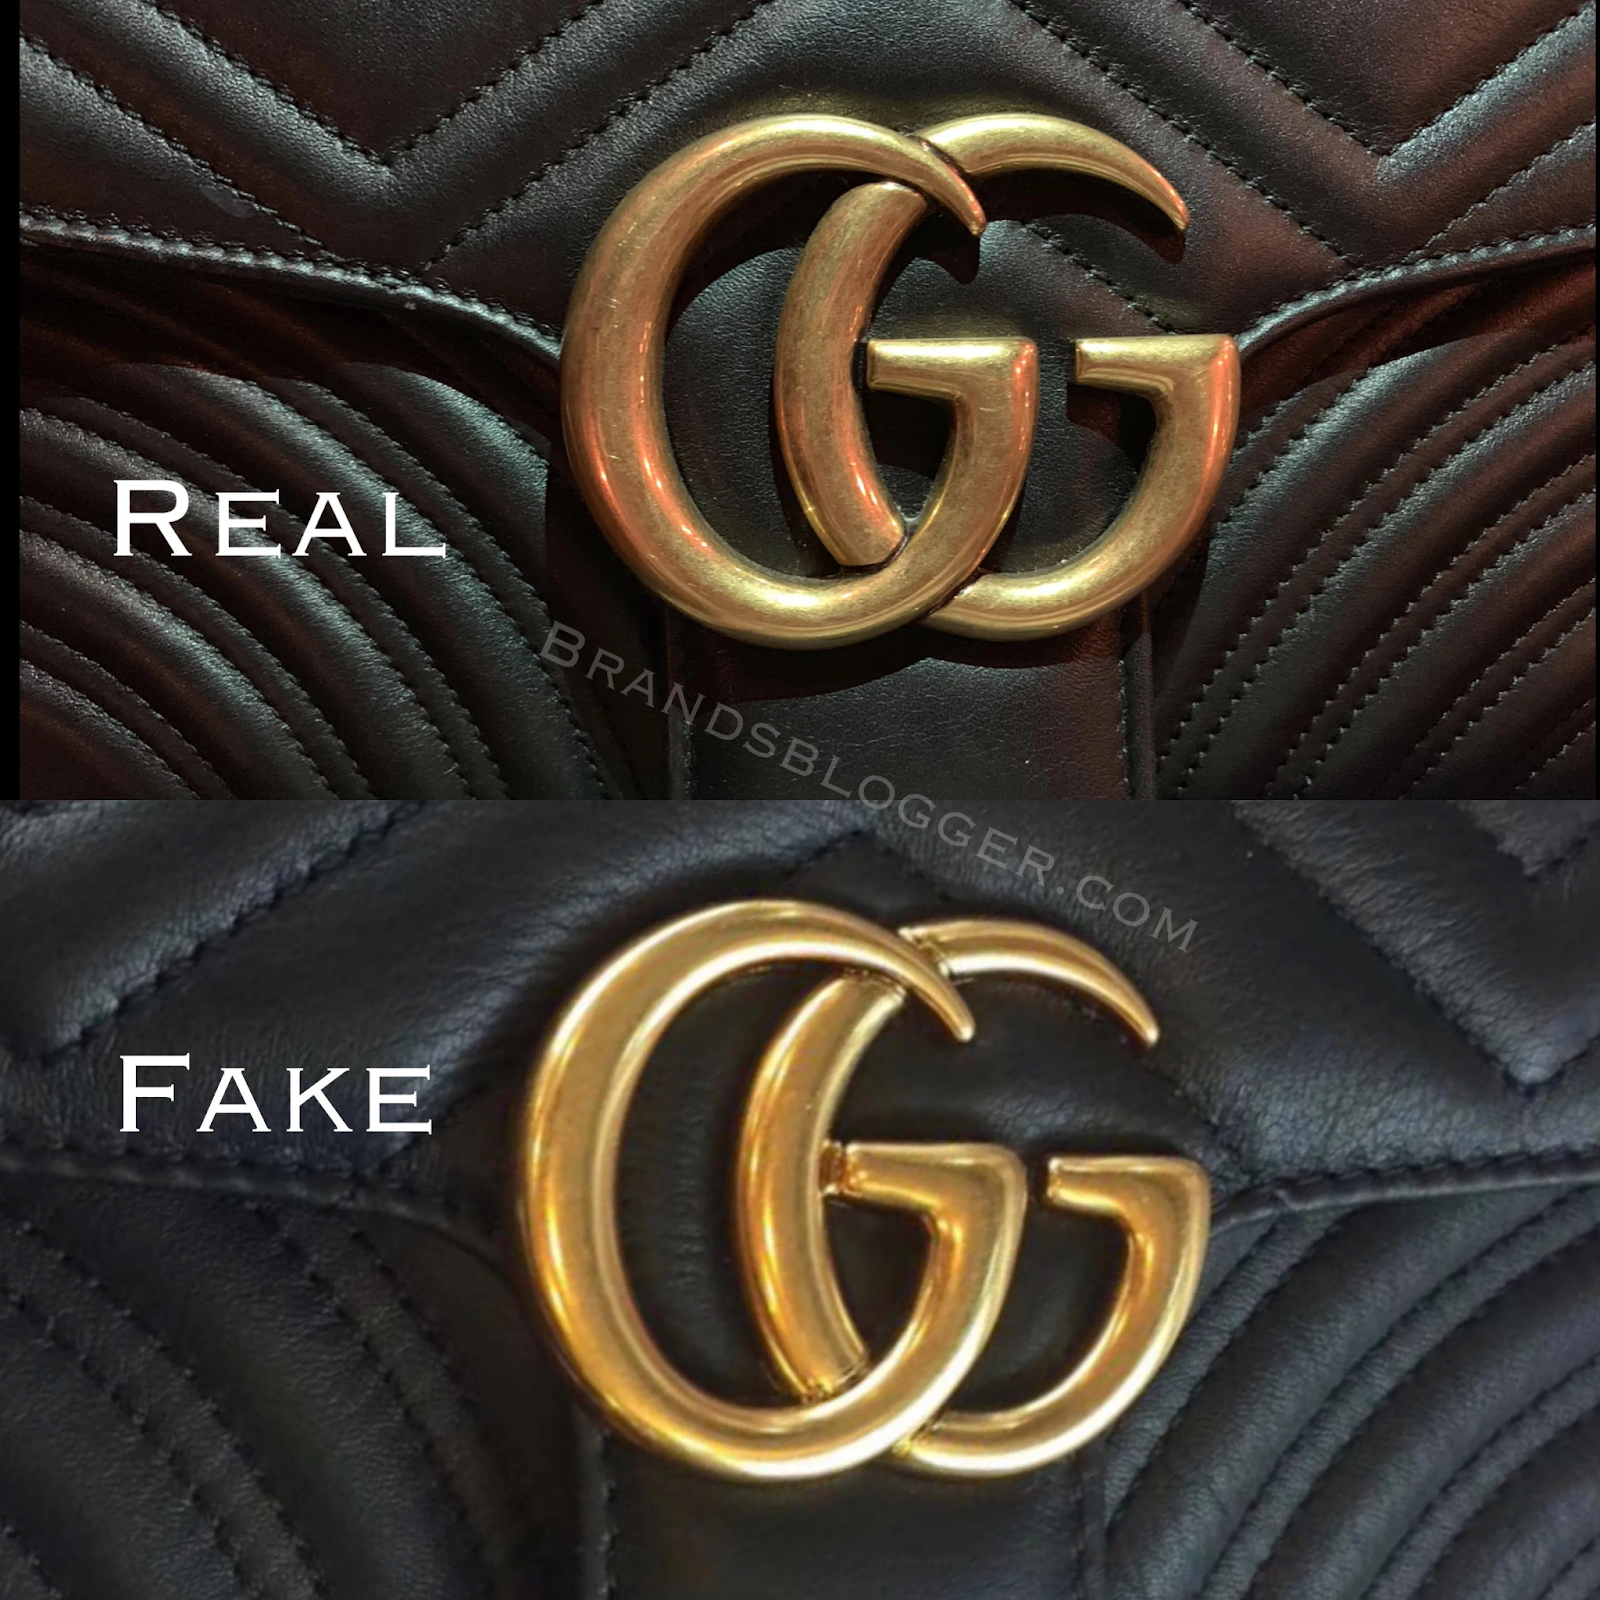 Real vs. Fake Gucci Bags Check Authenticity, Serial Number - Daily Bite